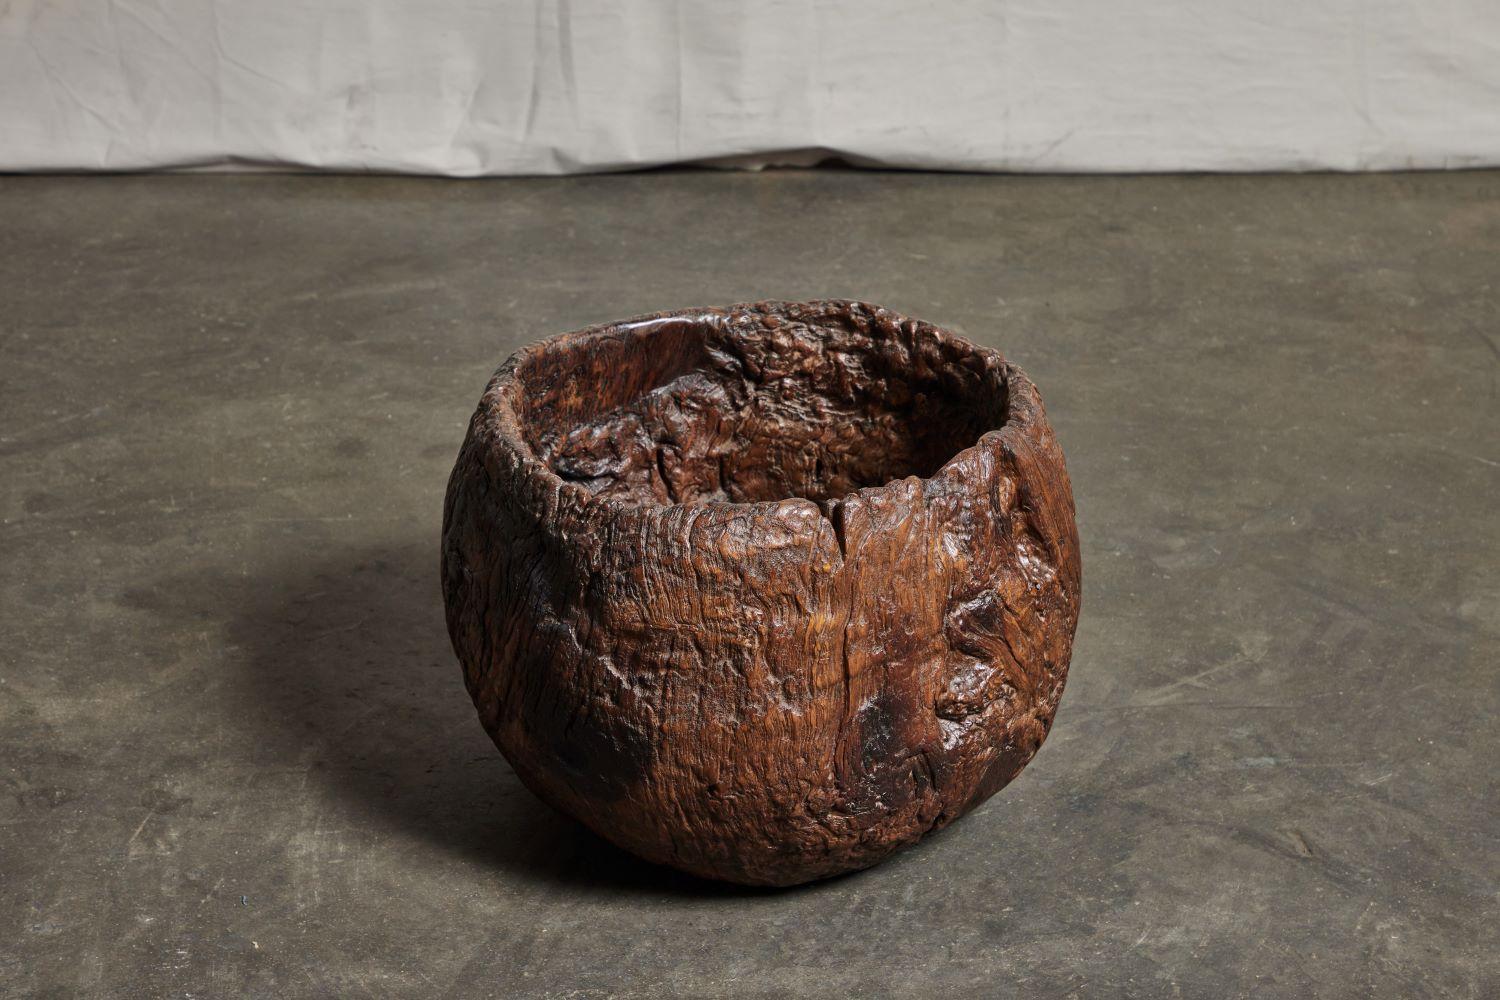 An antique granary mortar bowl in teak hardwood burl. From rural Java, Indonesia, circa early 19th century. Shows a poetic overall erosion pattern and patina.